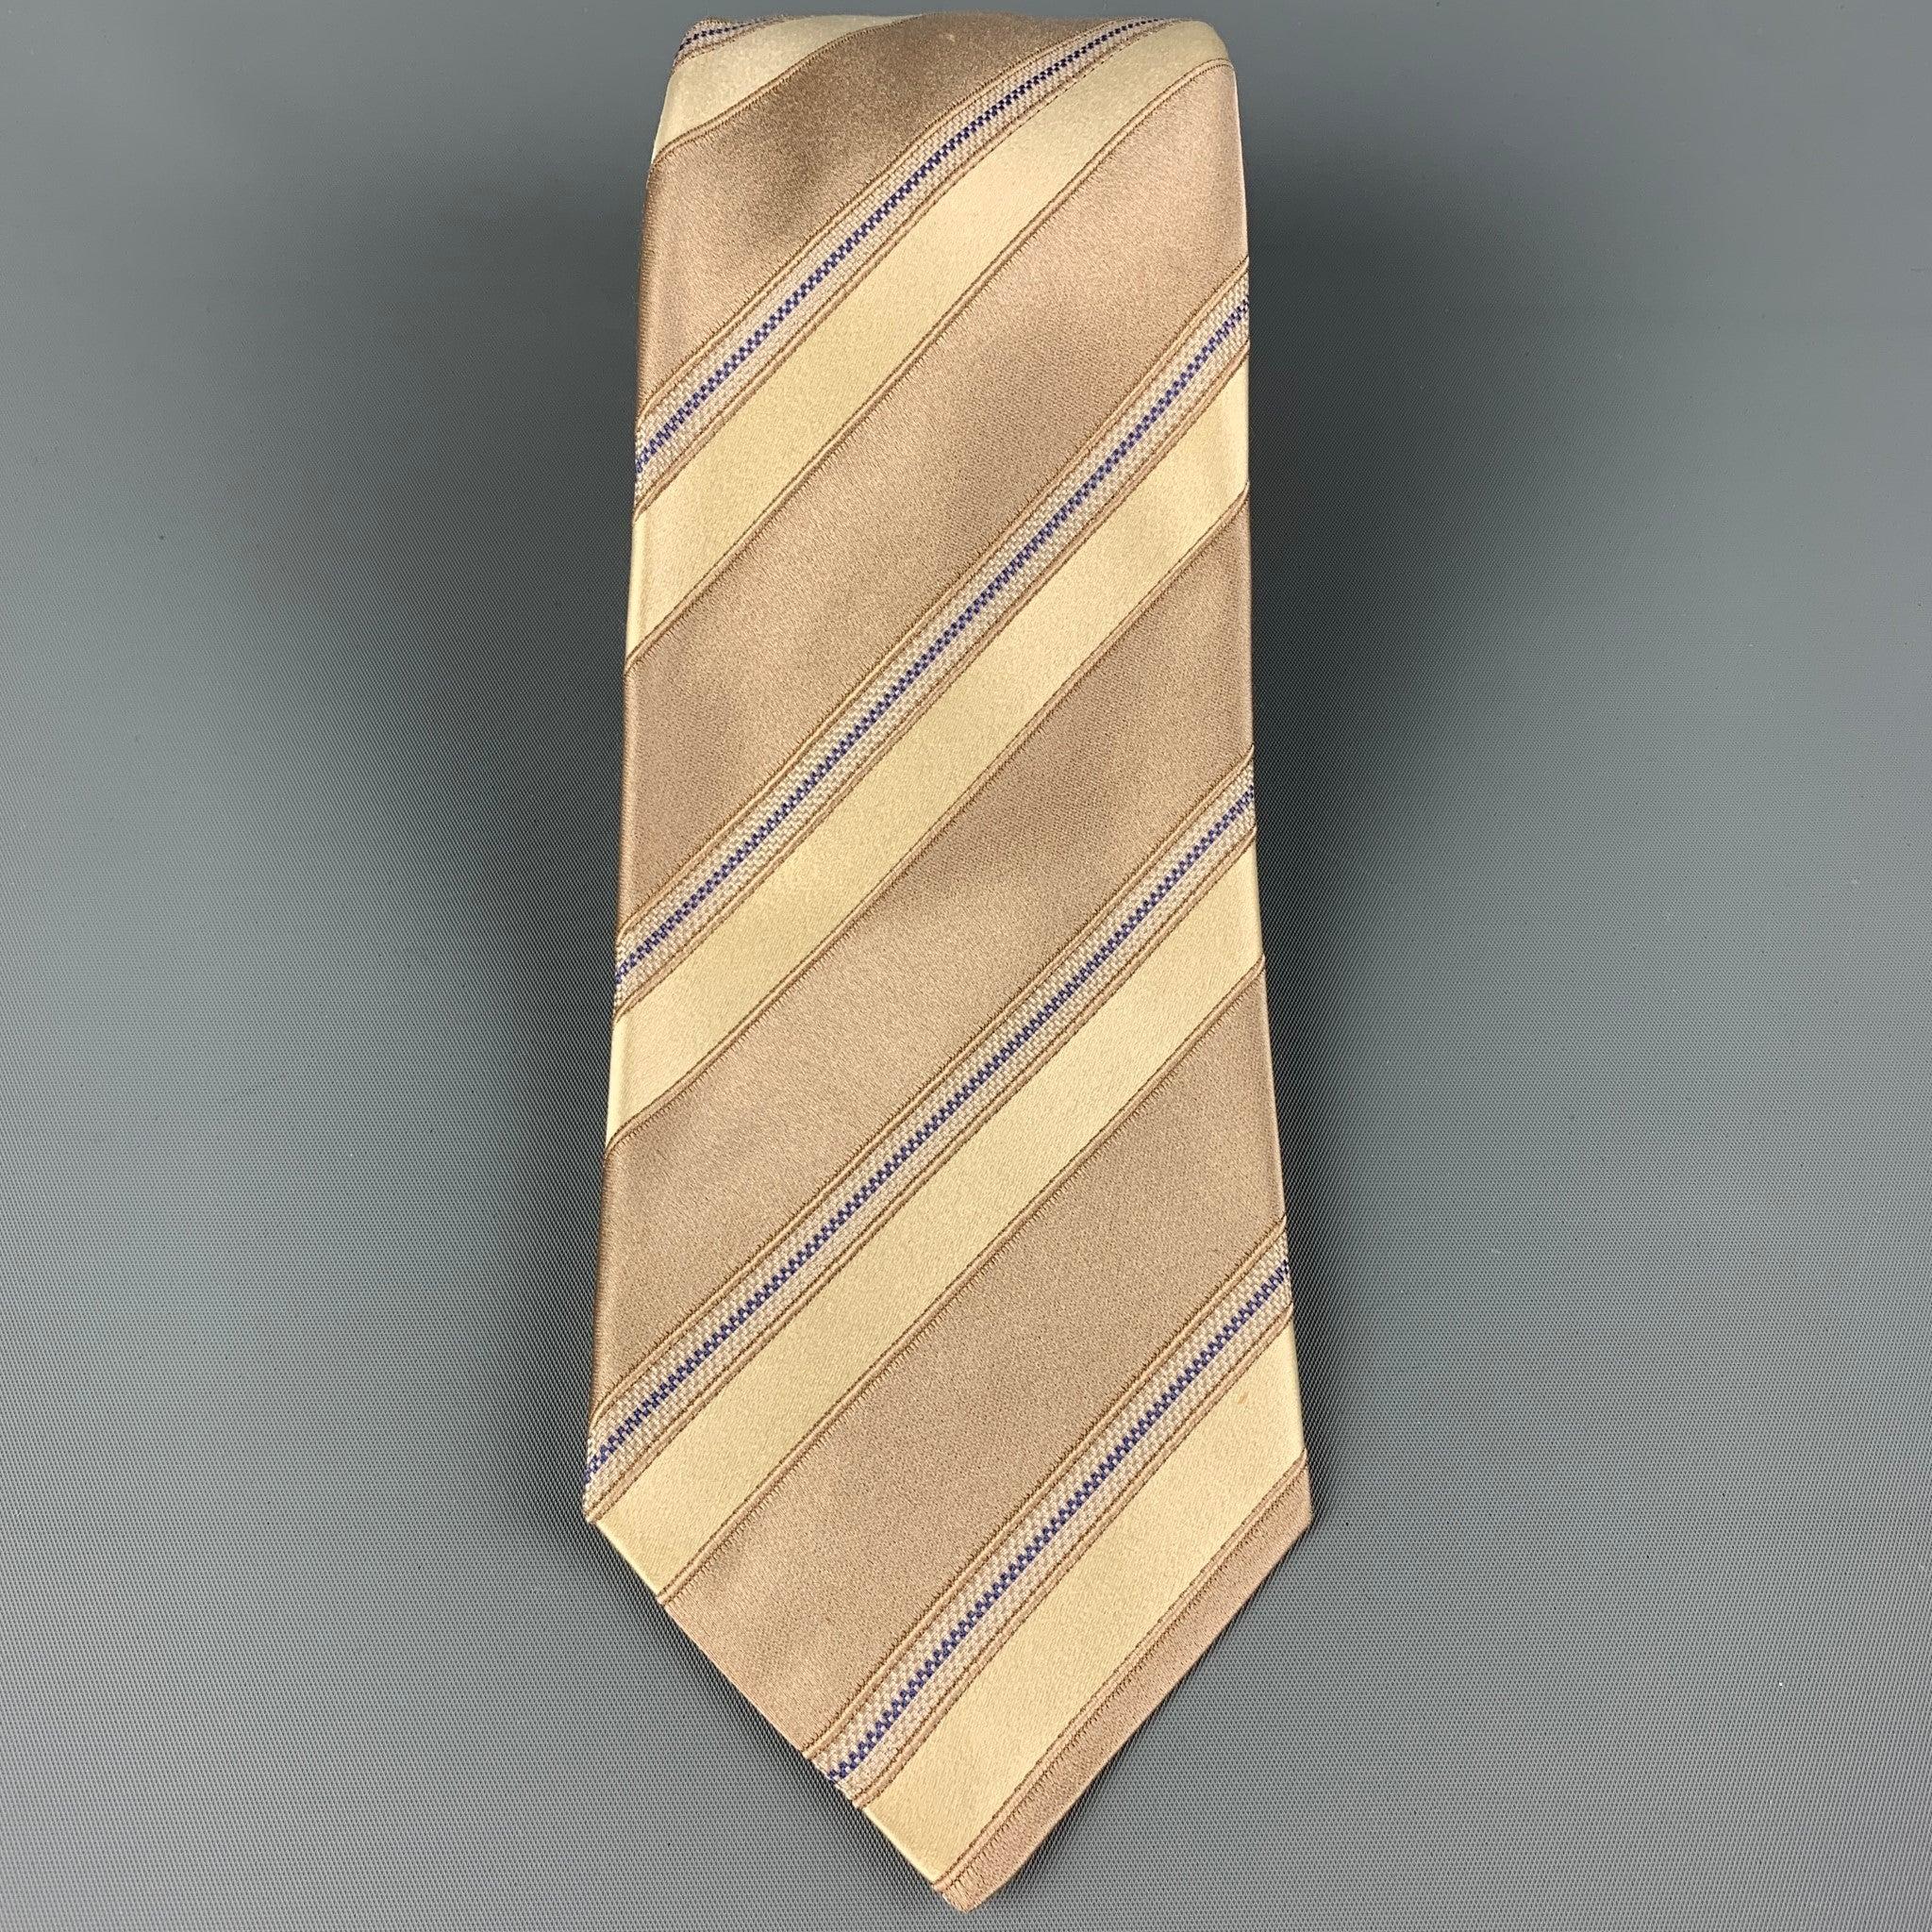 KITON necktie comes in a taupe & yellow silk with a all over diagonal stripe print. Made in Italy . Very Good Pre-Owned Condition.Width: 3.75 inches  Length: 62 inches 


  
  
 
Reference: 120386
Category: Tie
More Details
    
Brand: 